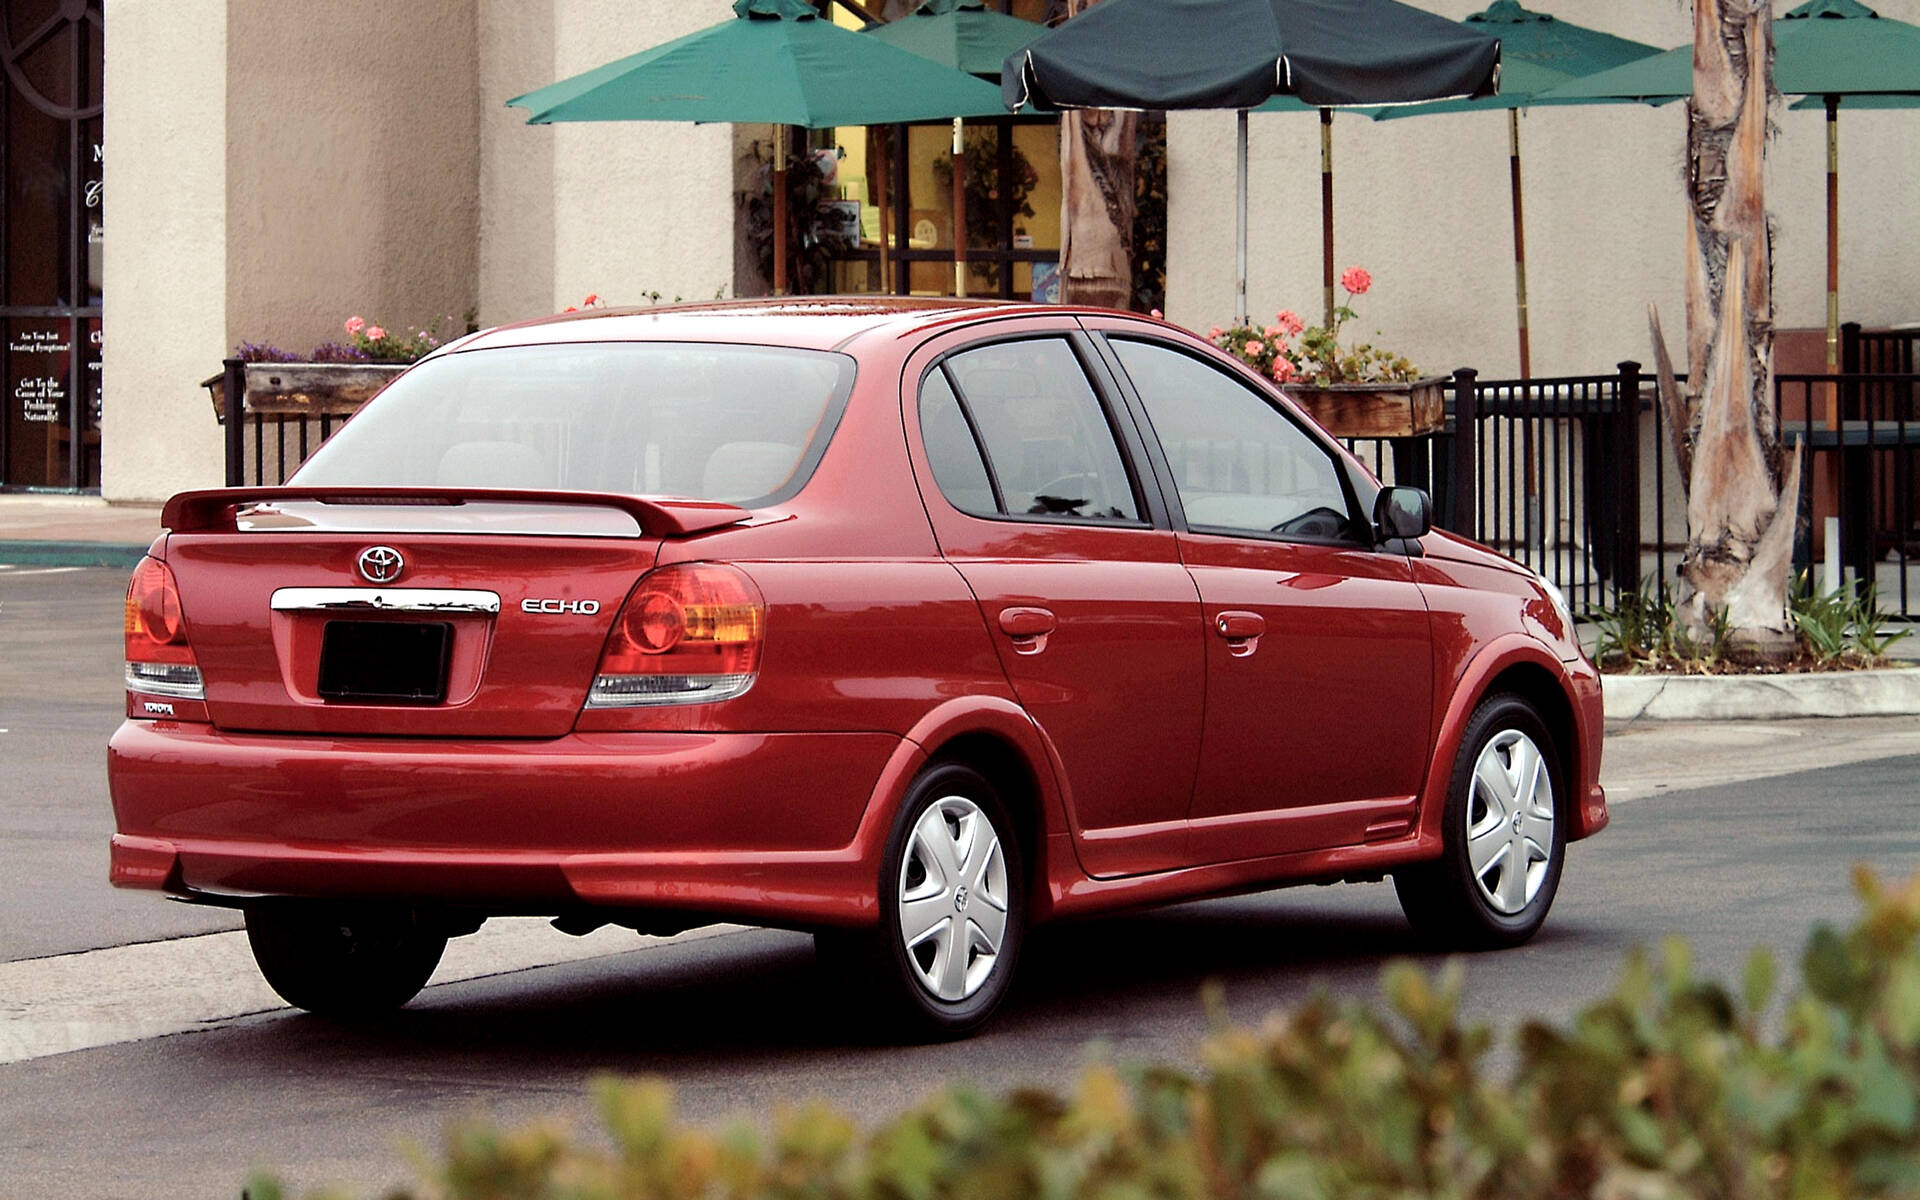 <p><strong>Toyota Echo 2005</strong></p>